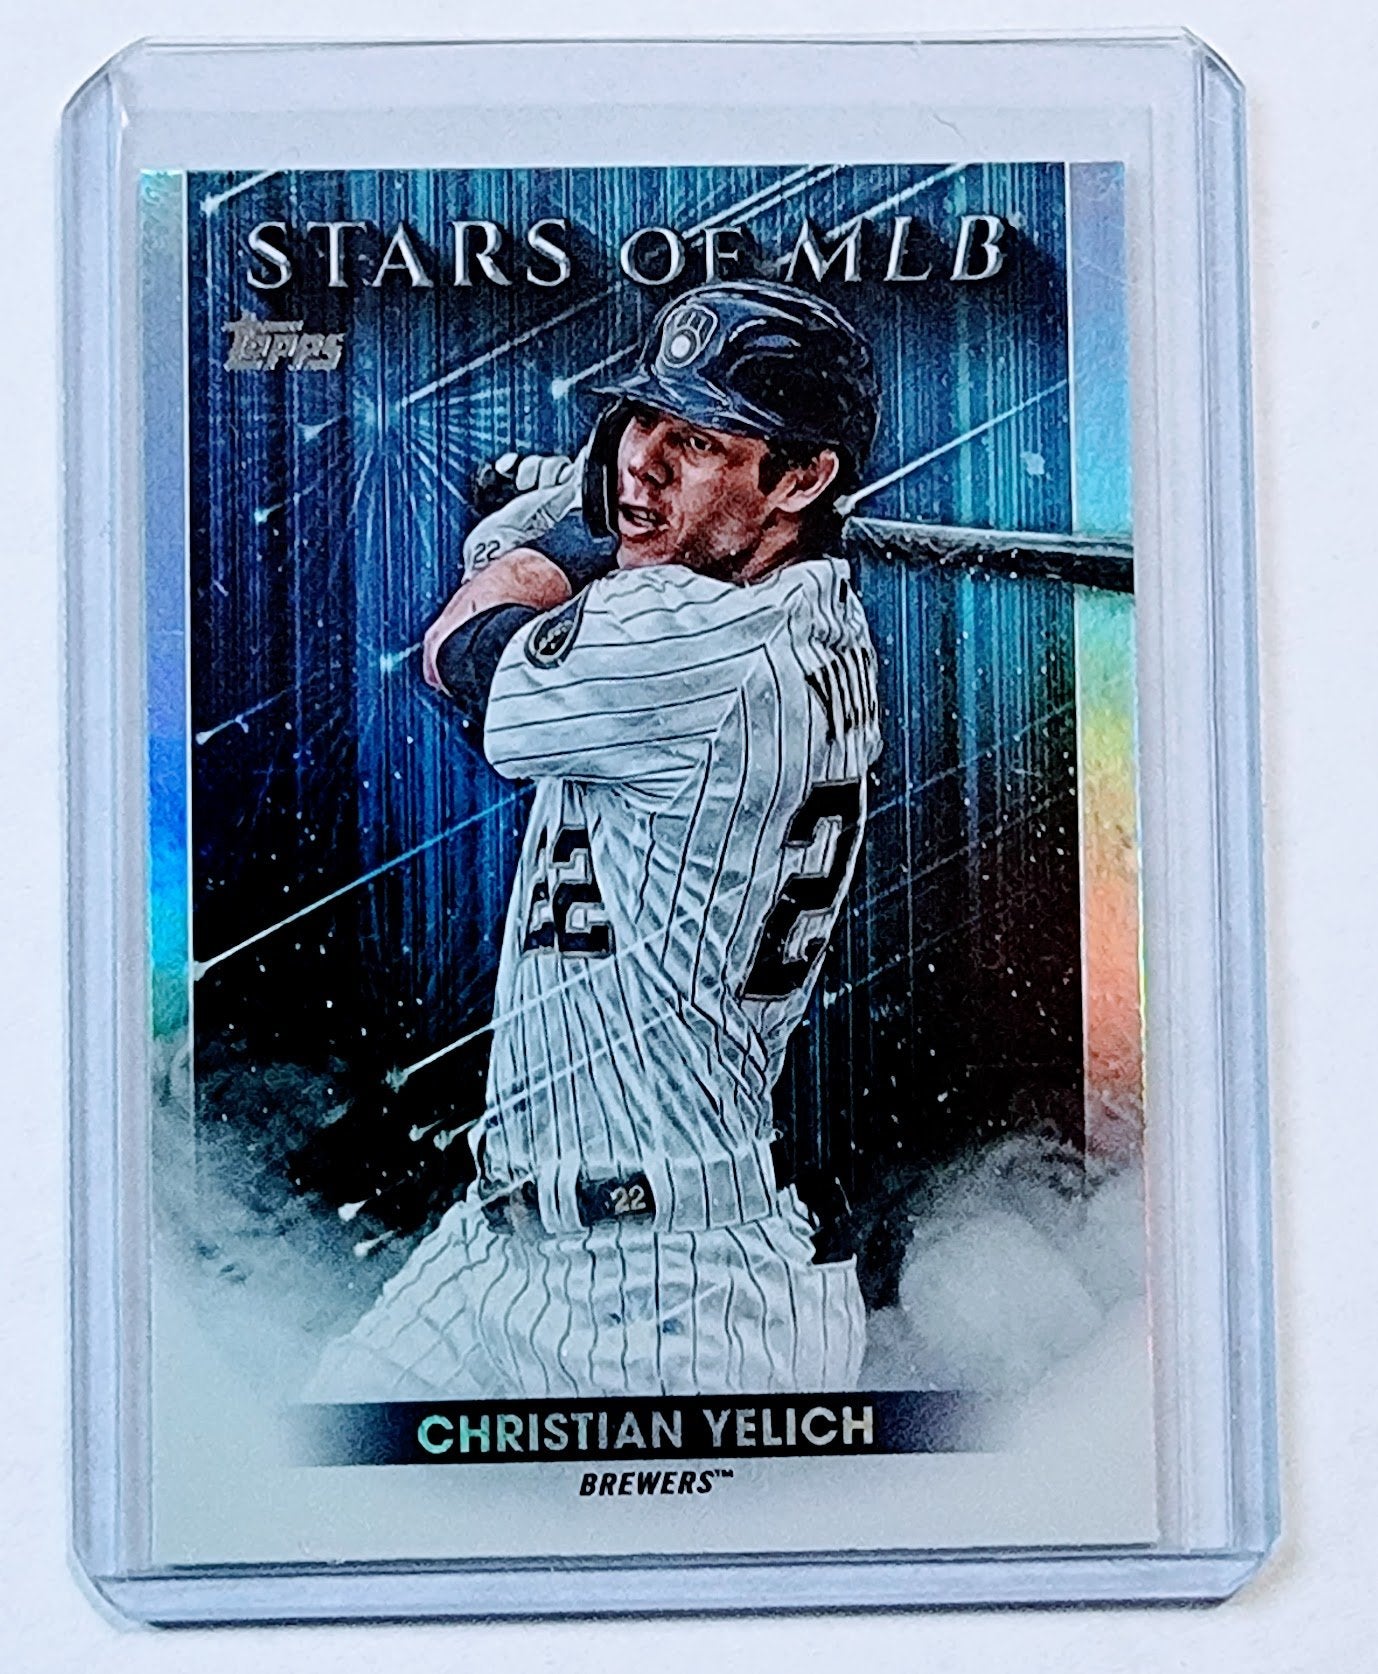 2022 Topps Christian Yelich Stars of the MLB Foil Insert Baseball Card AVM1 simple Xclusive Collectibles   